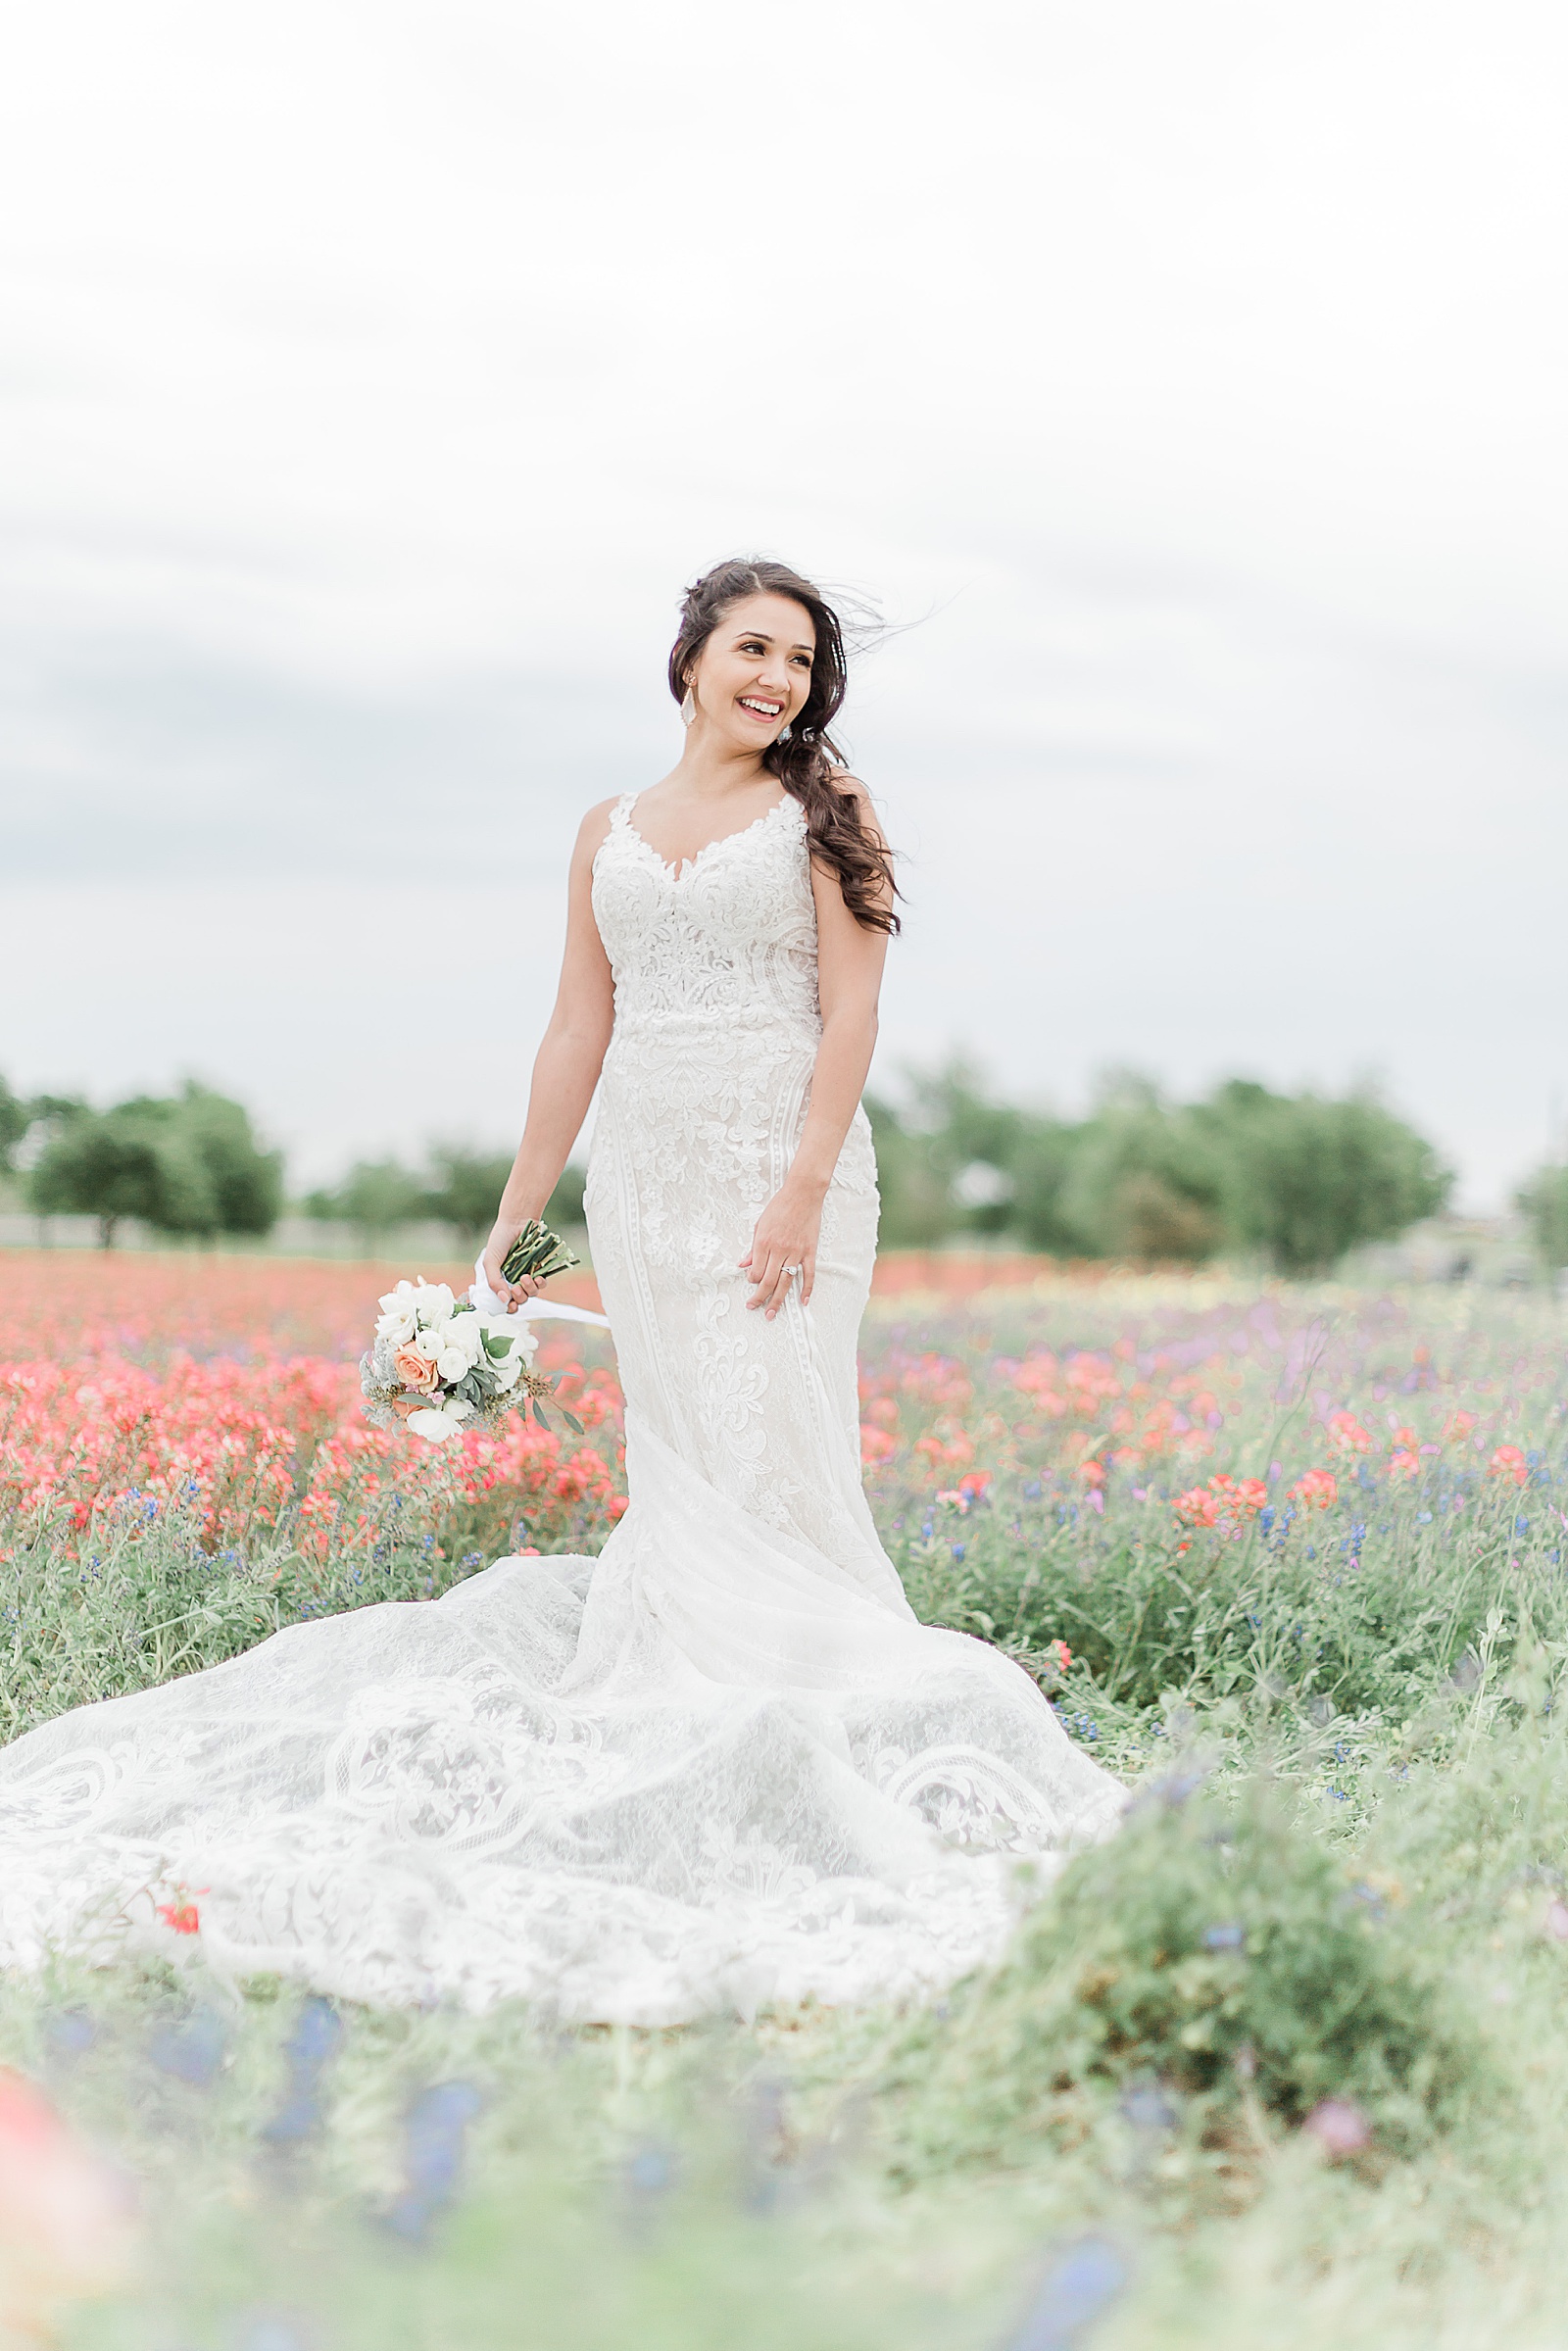 Romantic Flower Bridal Session with Lace Gown by Anna Kay Photography, Destination Wedding Photographer